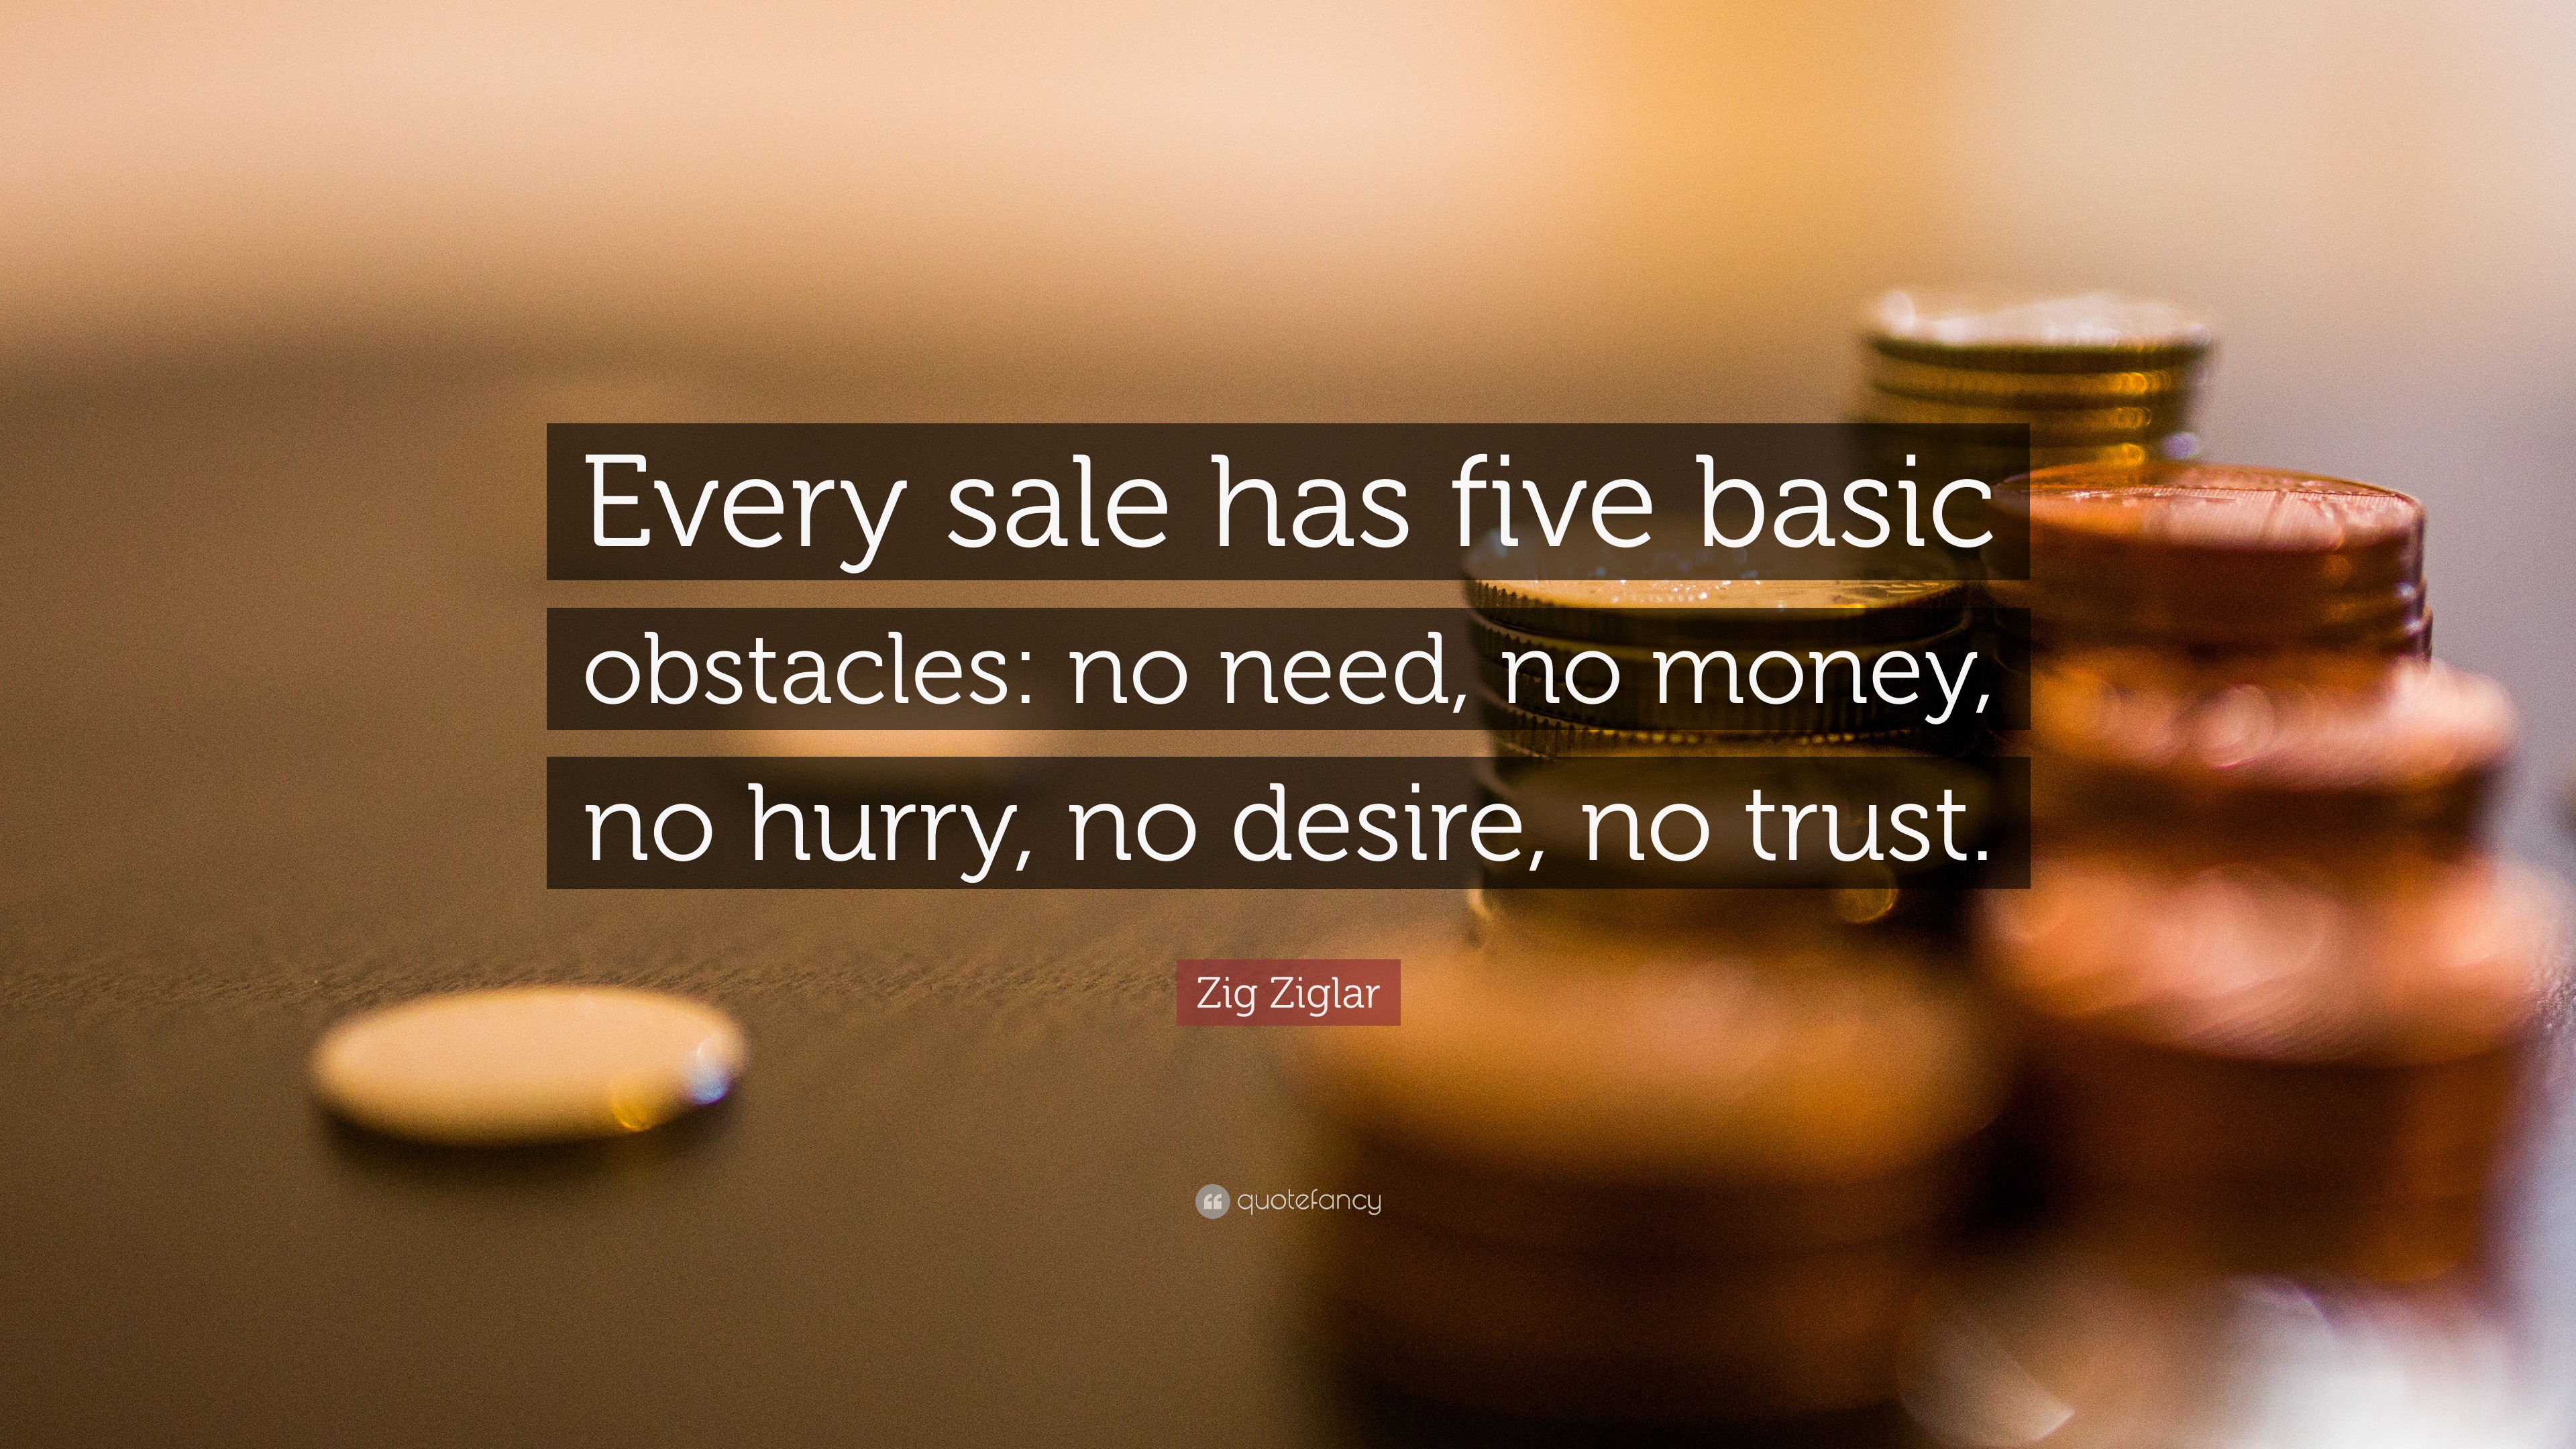 Business Quotes (52 wallpapers) - Quotefancy